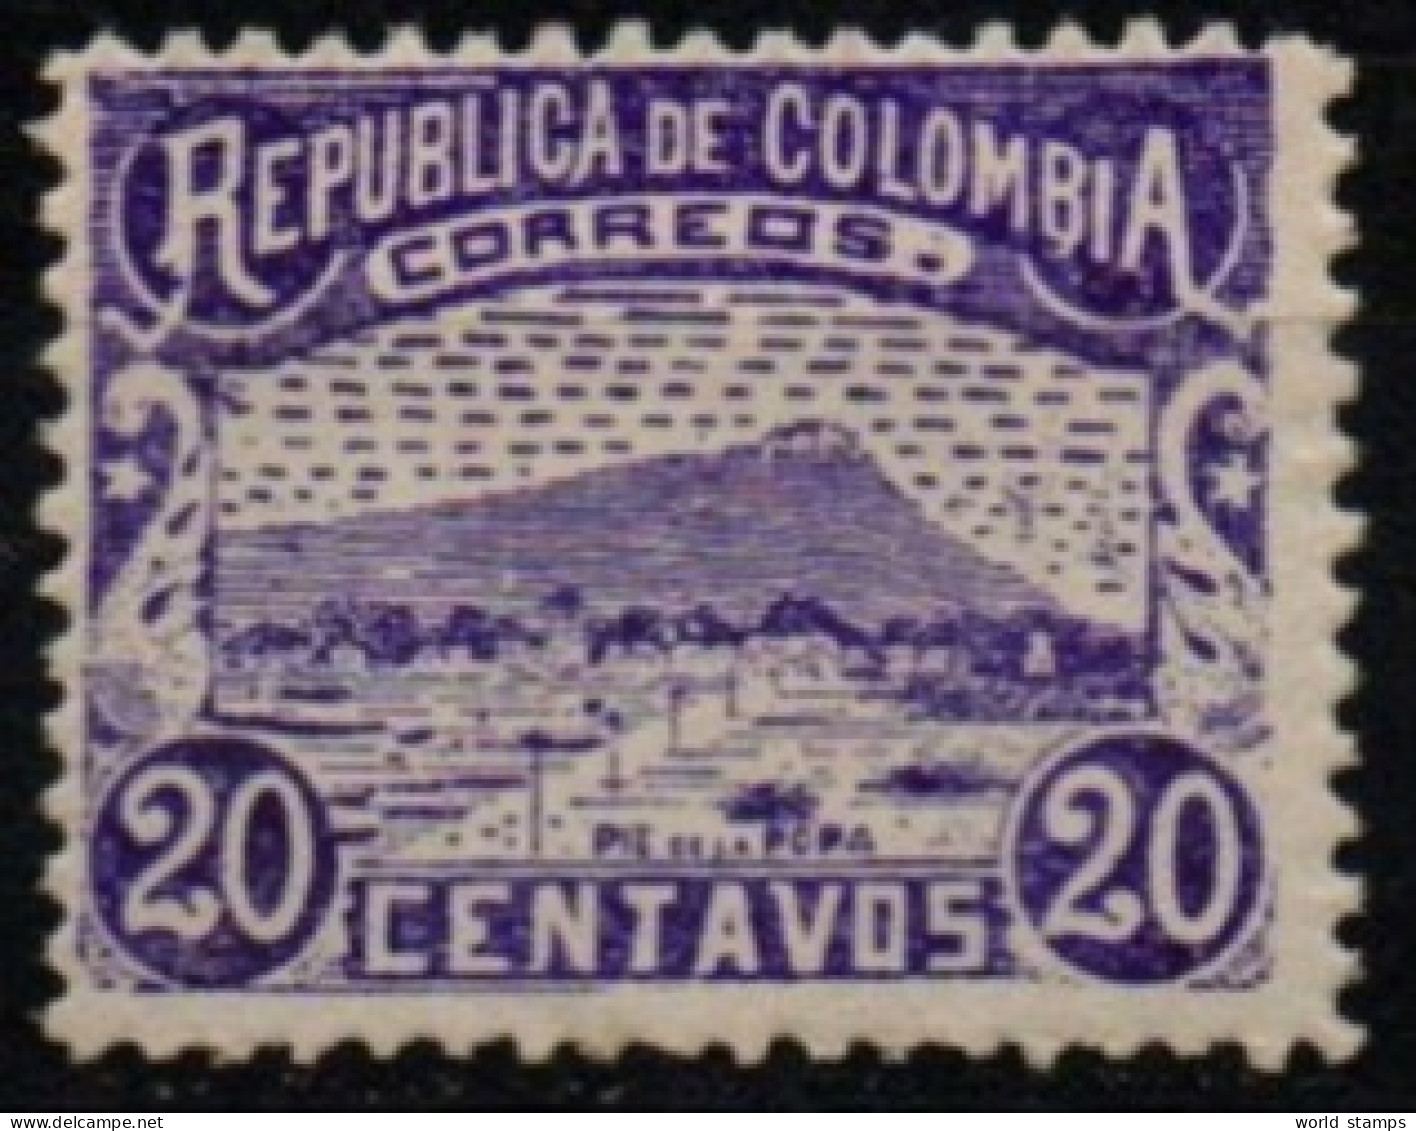 COLOMBIE 1902-3 * - Colombie